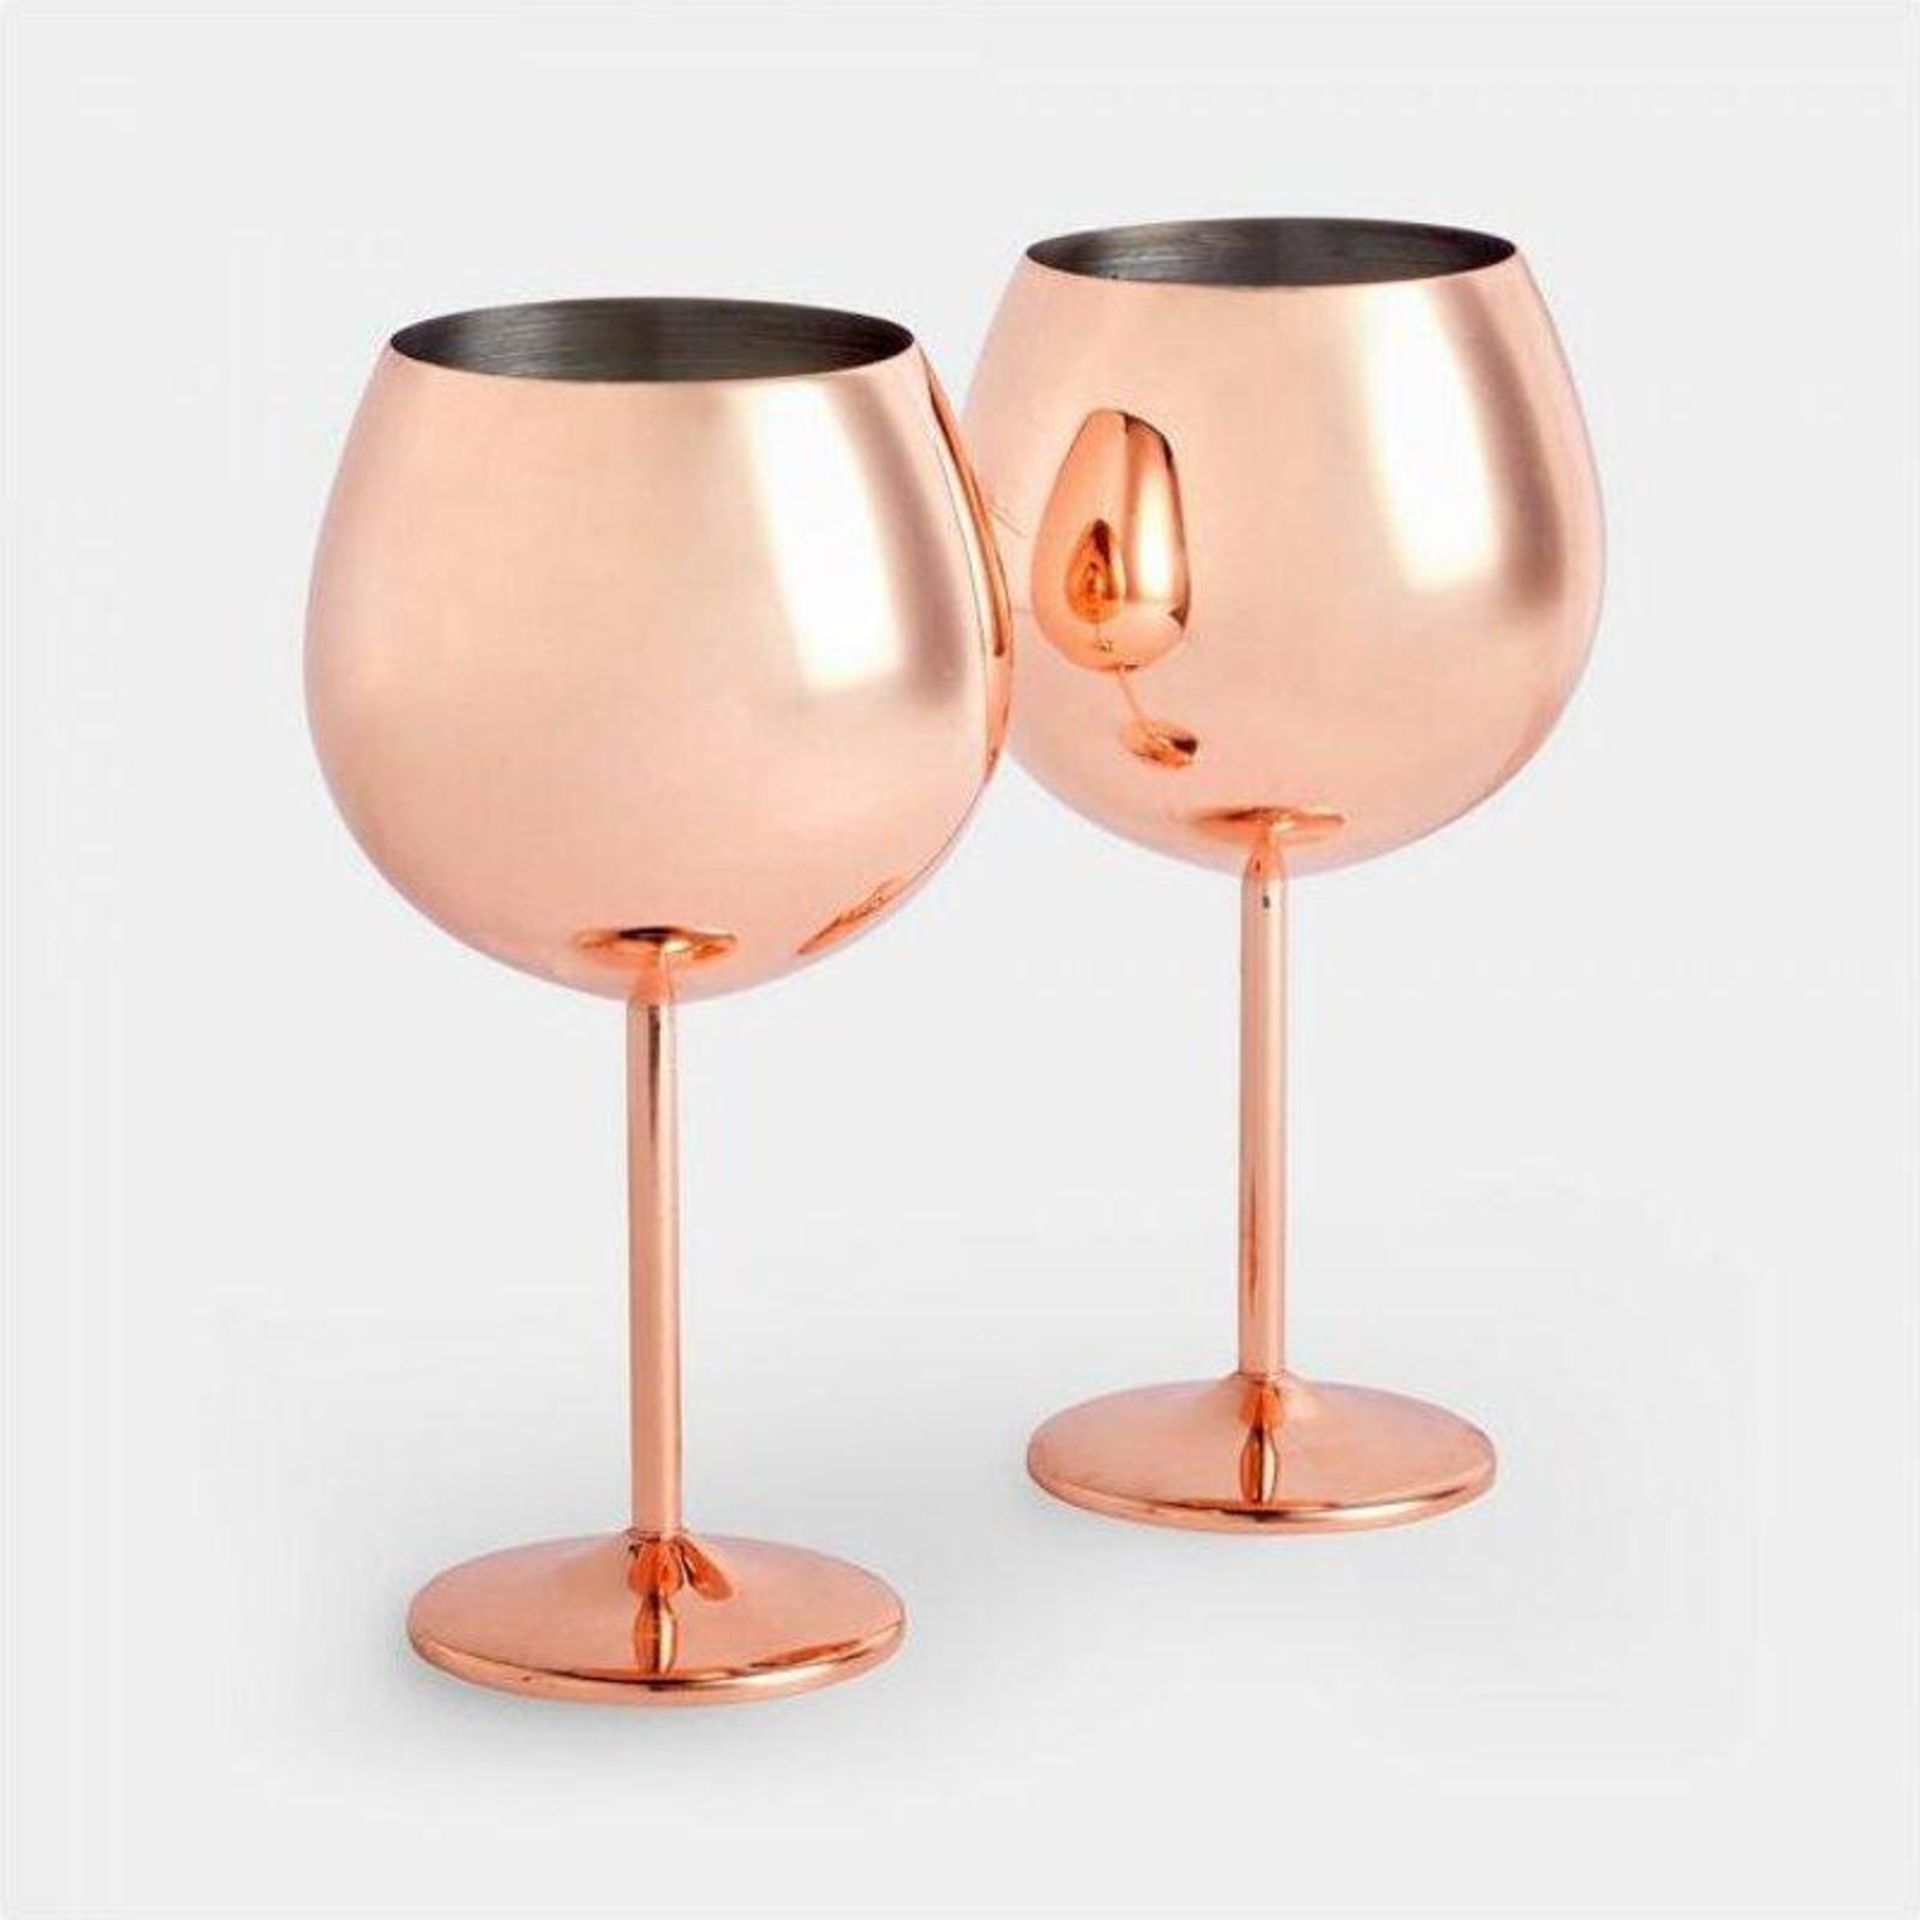 5x Beautify Set of 2 Gin Balloon Glasses Rose Gold G&T Cocktail Glass Set Stainless Steel (ER35)